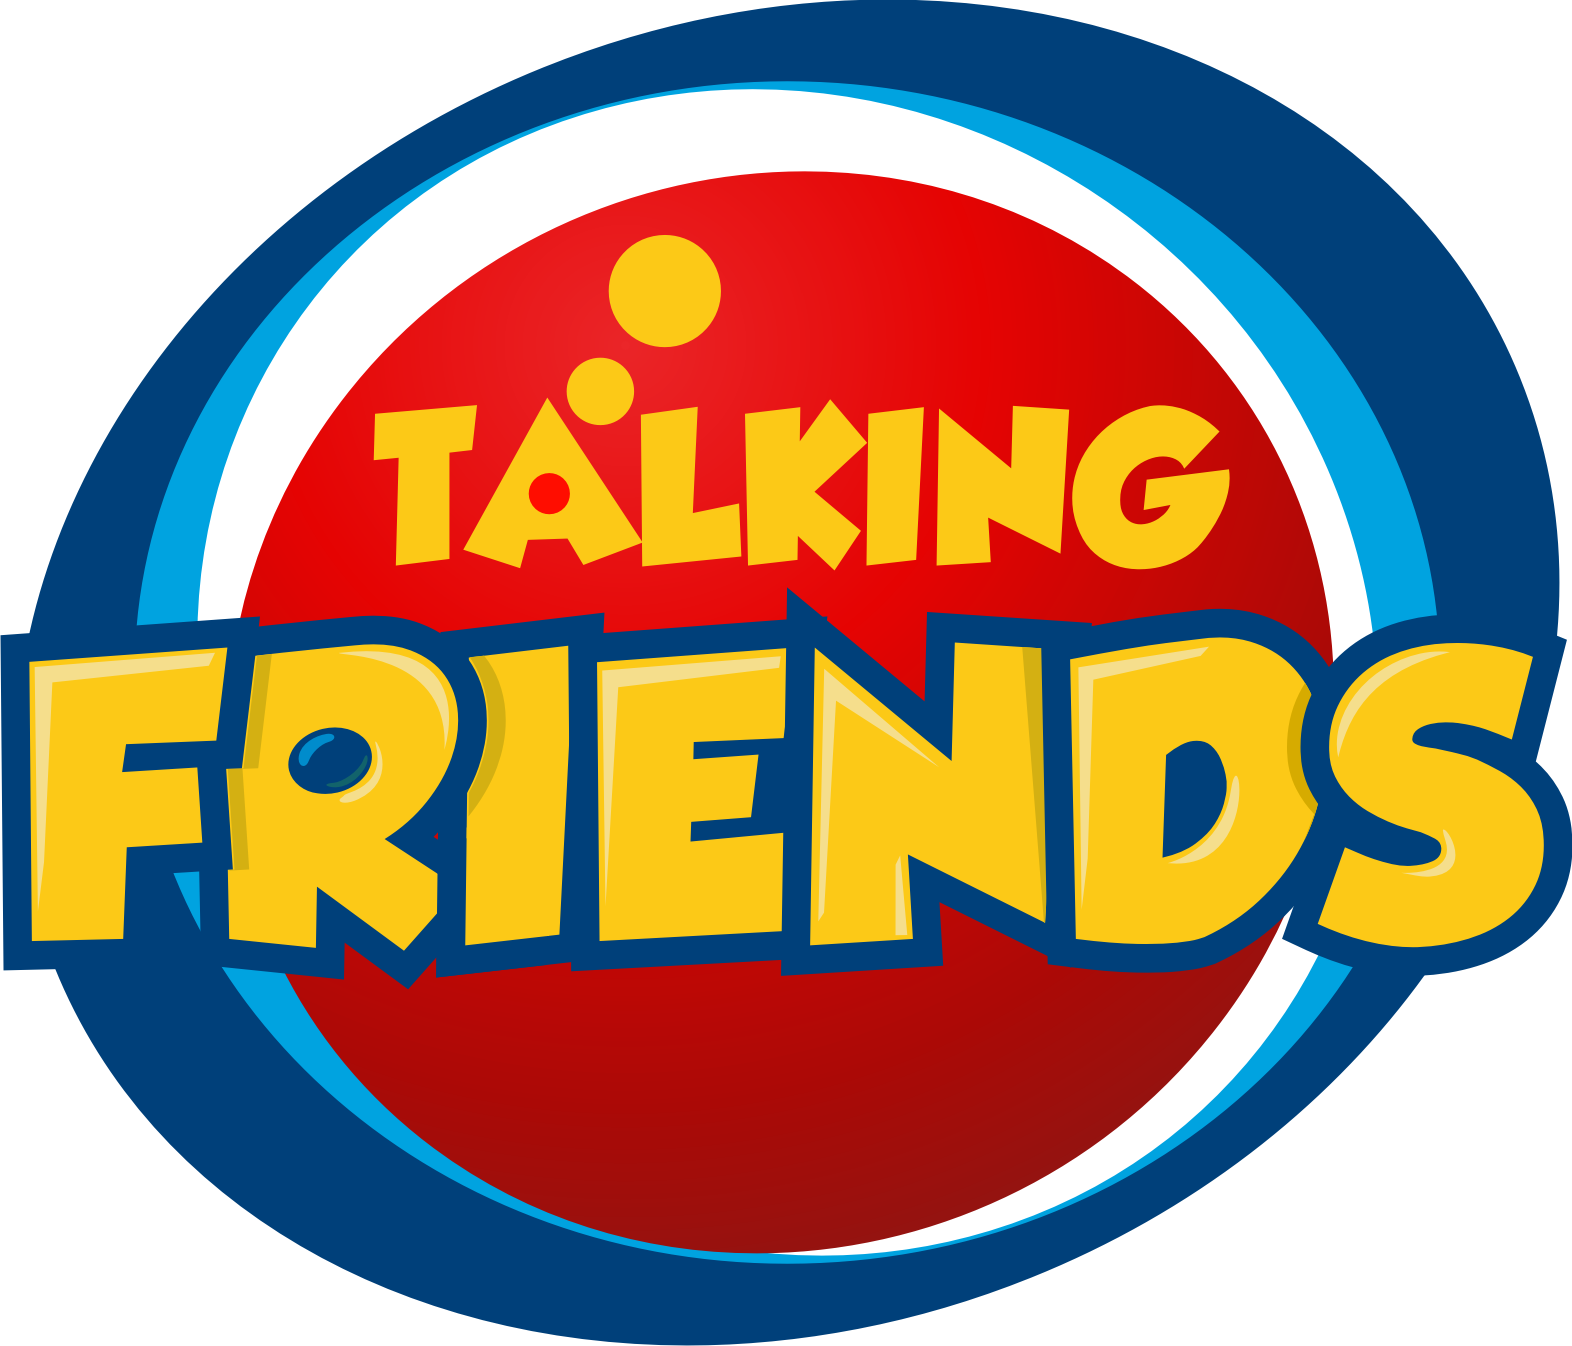 Talking friends apk. Talking friends. Friends логотип. Talking Tom логотип. Talking Tom and friends logo.